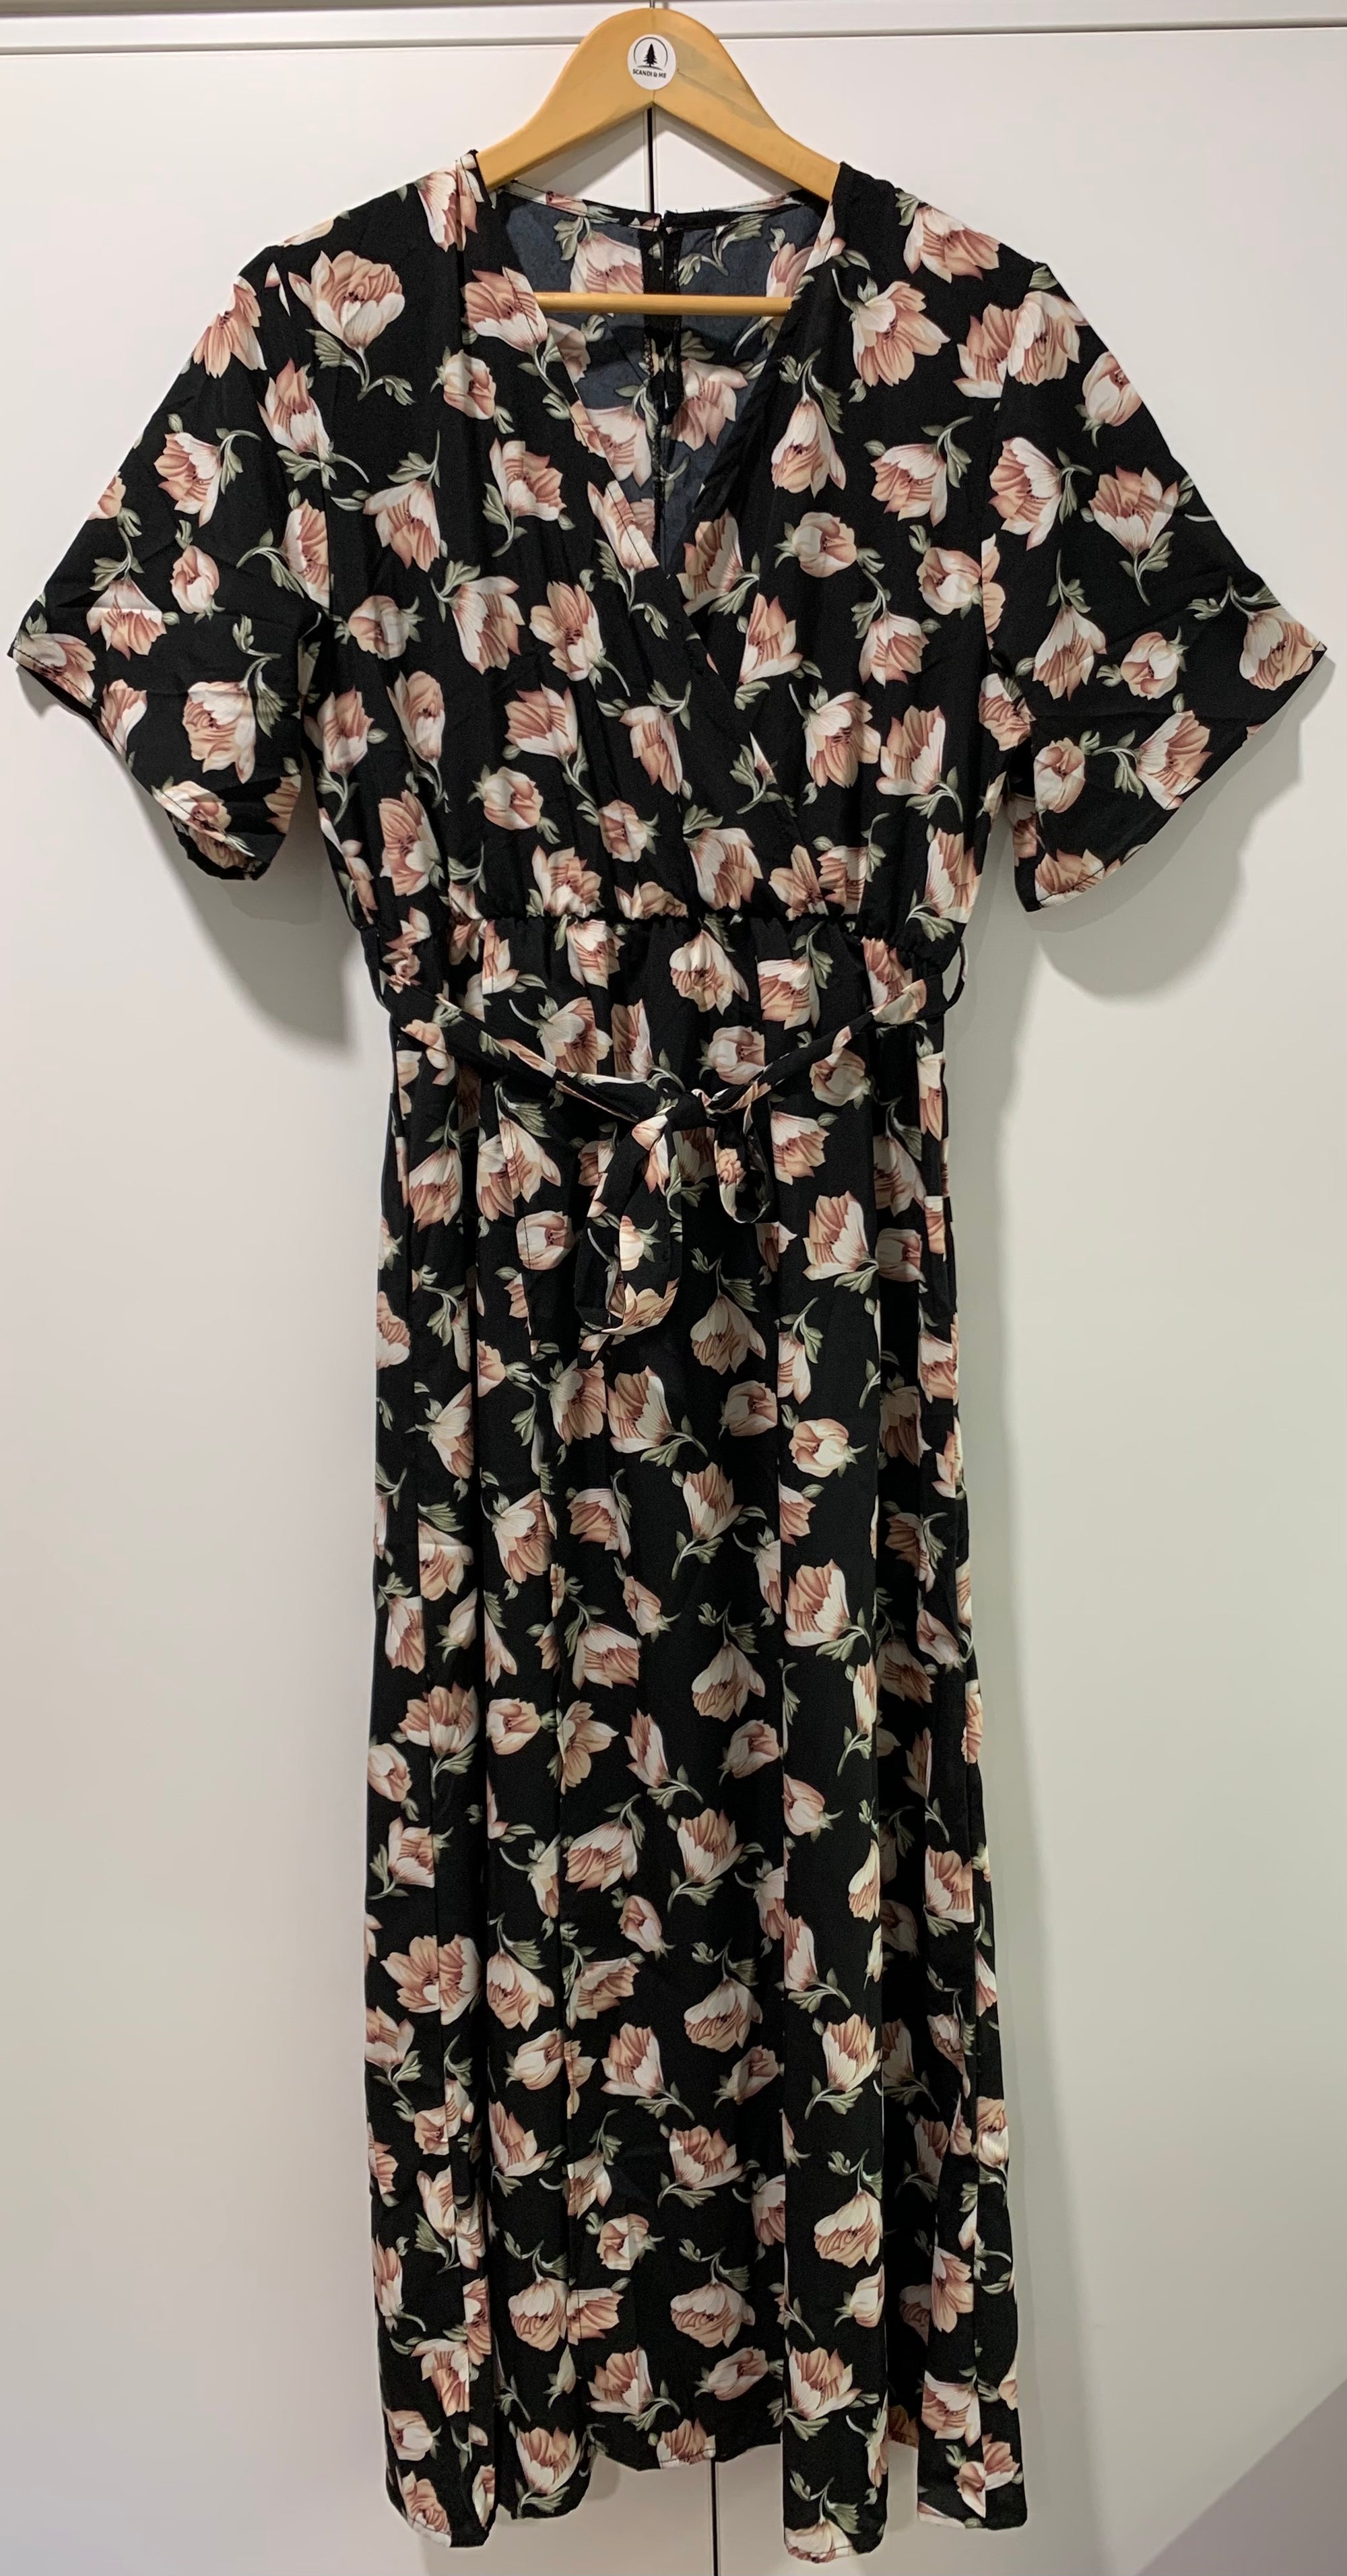 Long Dress in Black with Pink Floral Print Crossover Elastic Waist Style Women's Size L/XL - Scandi & Me